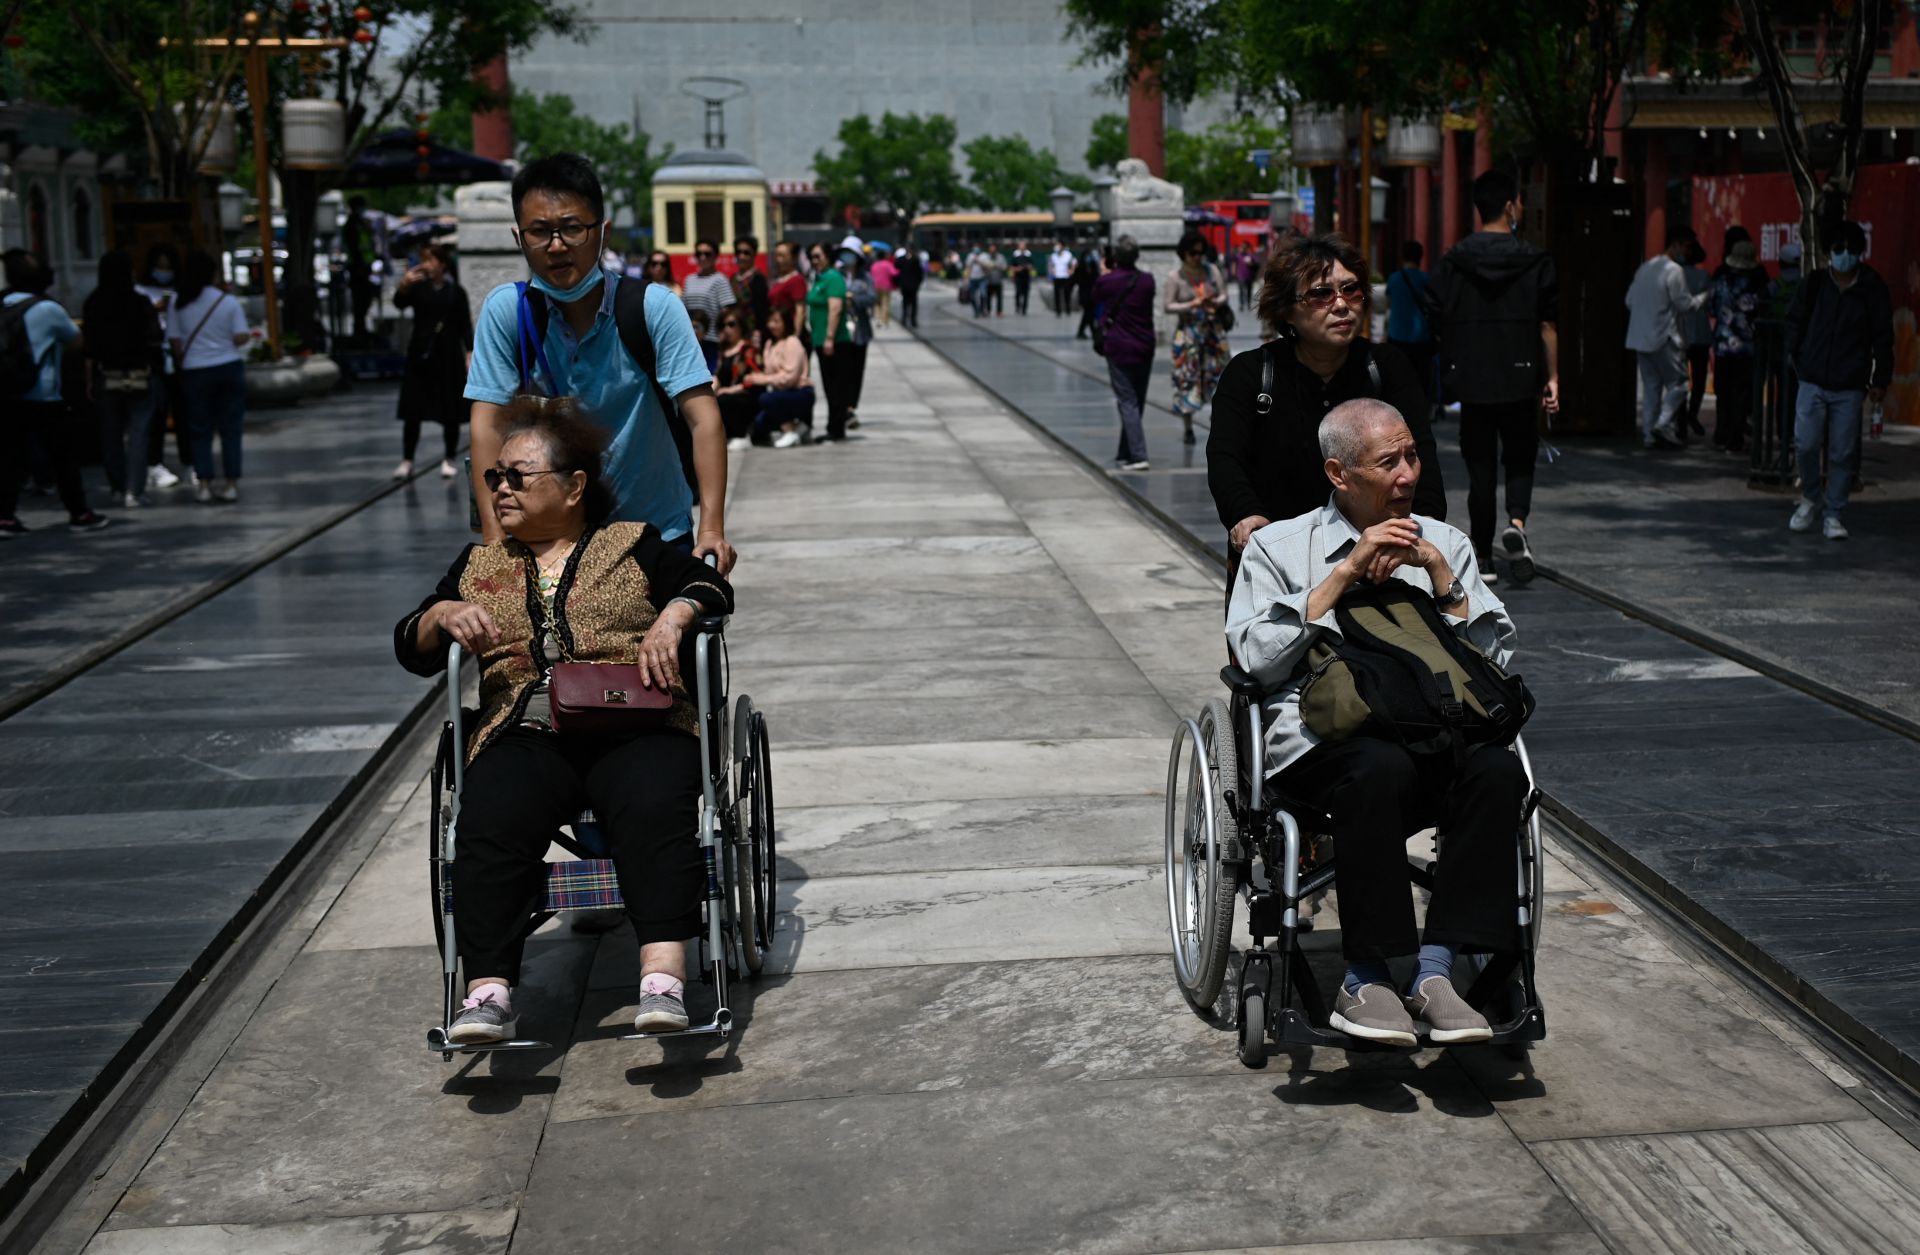 An elderly man and woman are pushed in wheelchairs along a street in Beijing, China, on May 11, 2021.